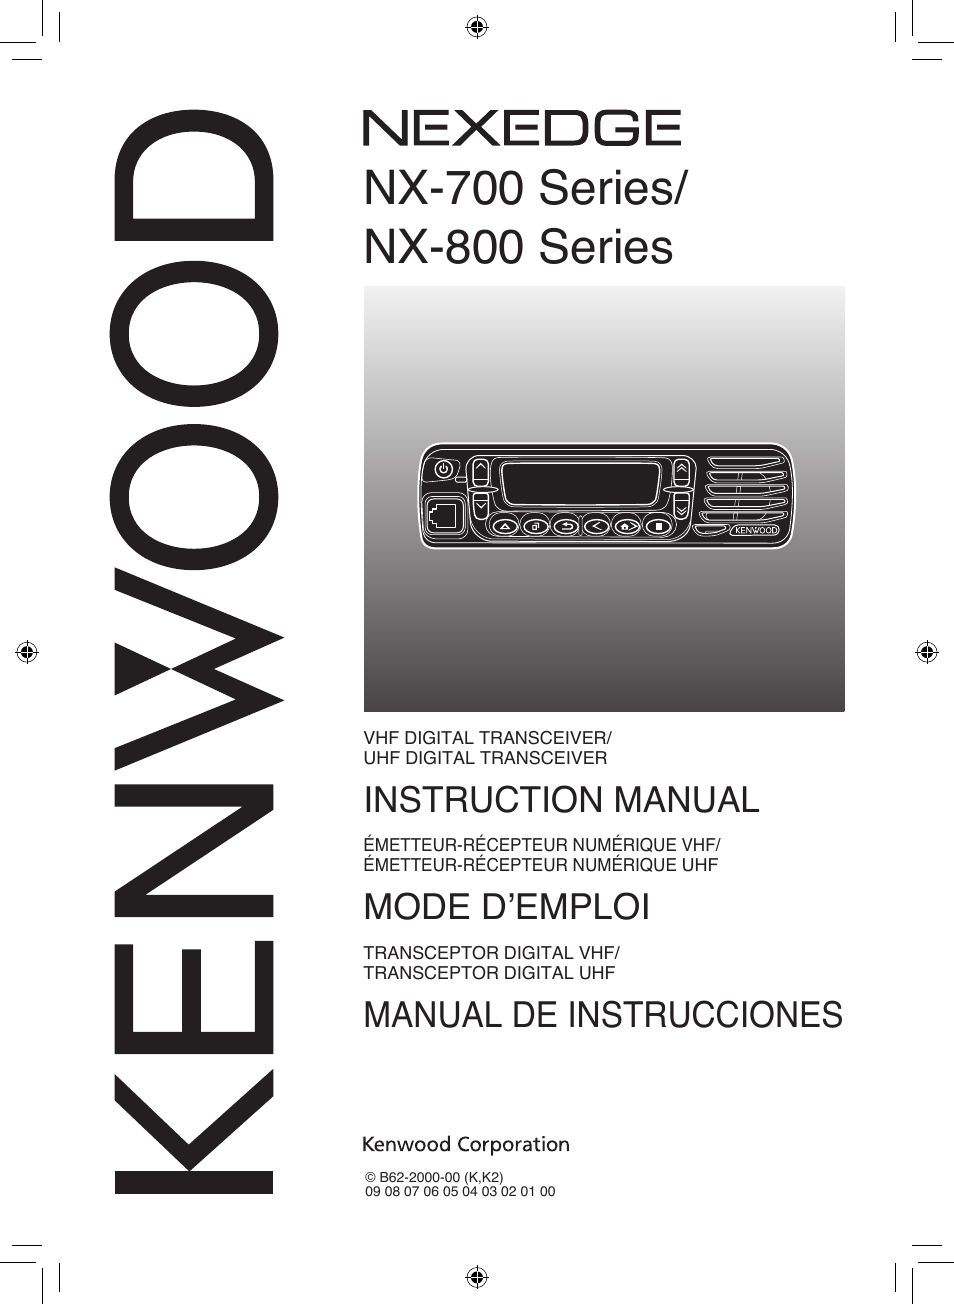 Kenwood NEXEDGE NX-700H User Manual | 37 pages | Also for: NX-700/800